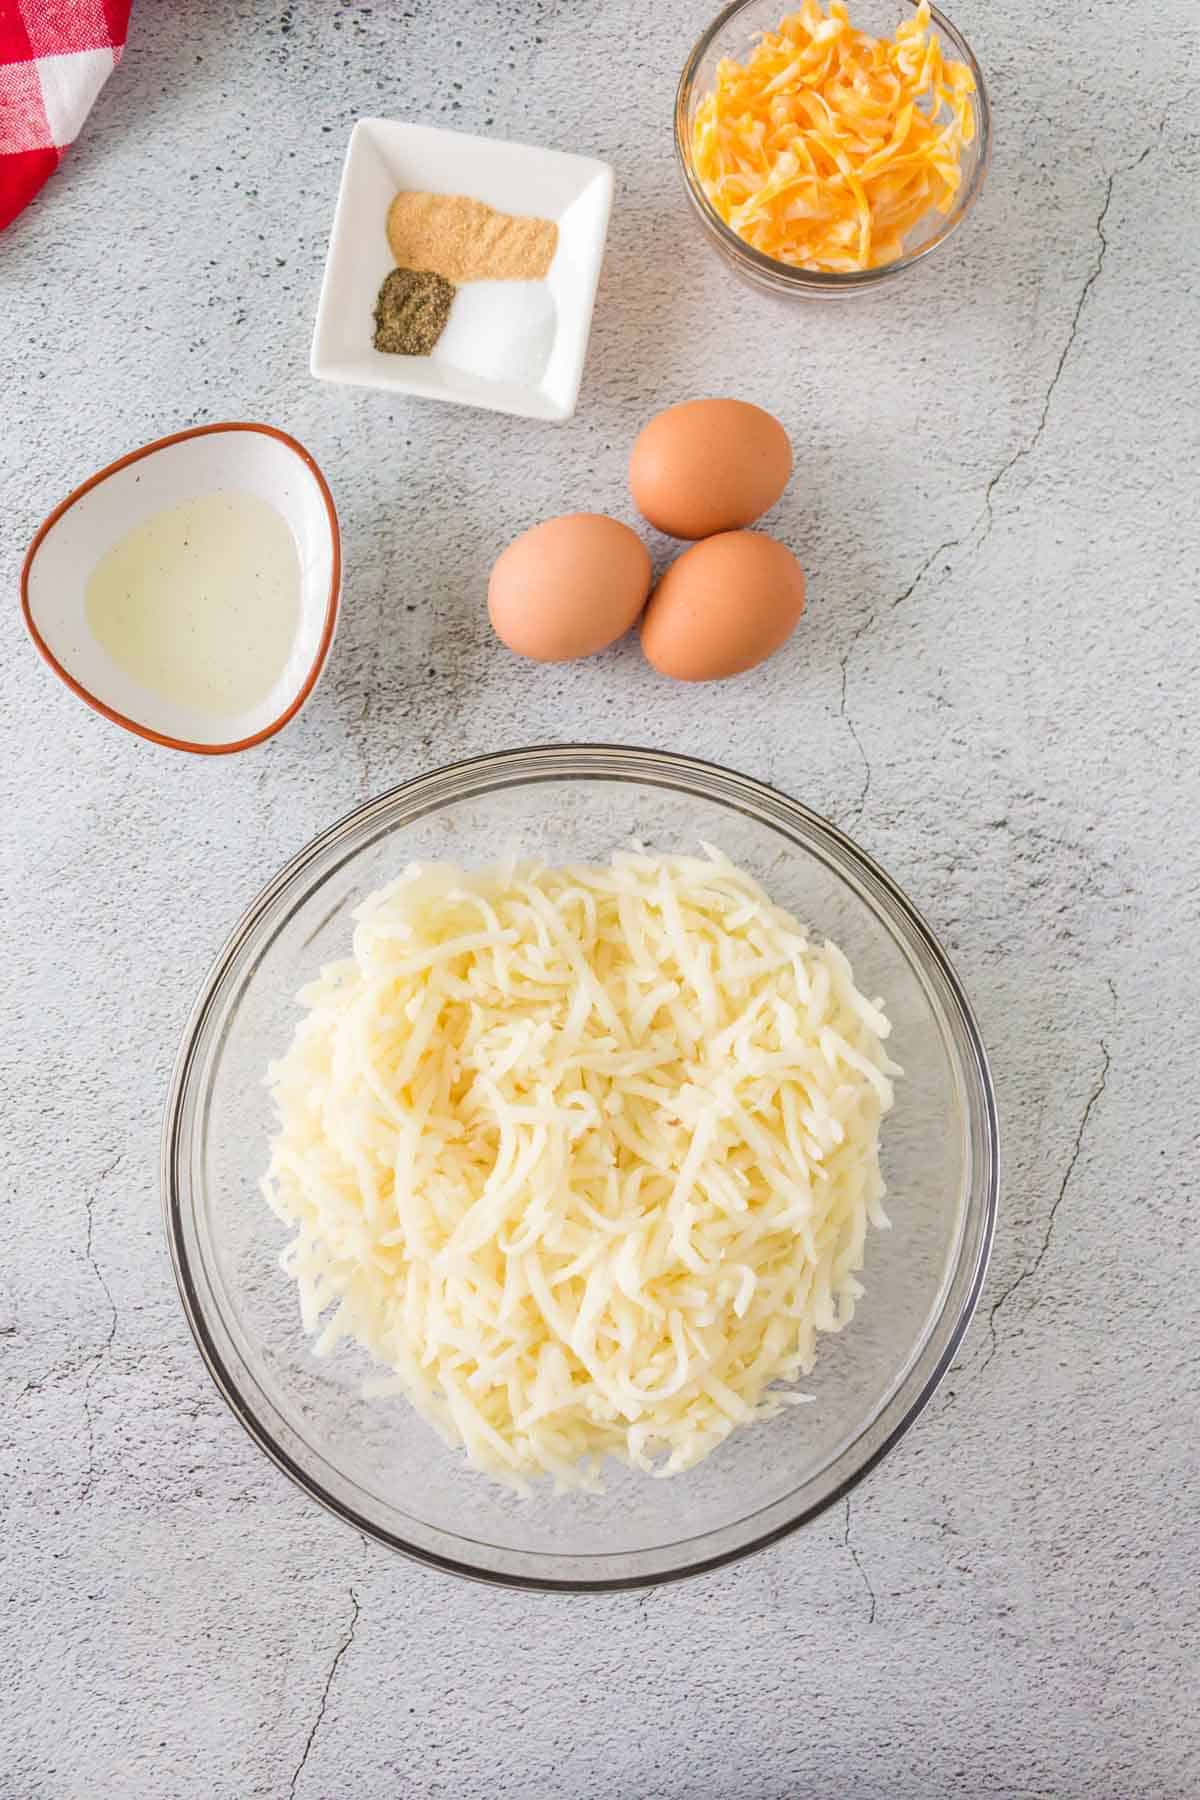 bowl of shredded potatoes, three eggs, and bowls of oil, shredded cheese, and seasonings on a tabletop